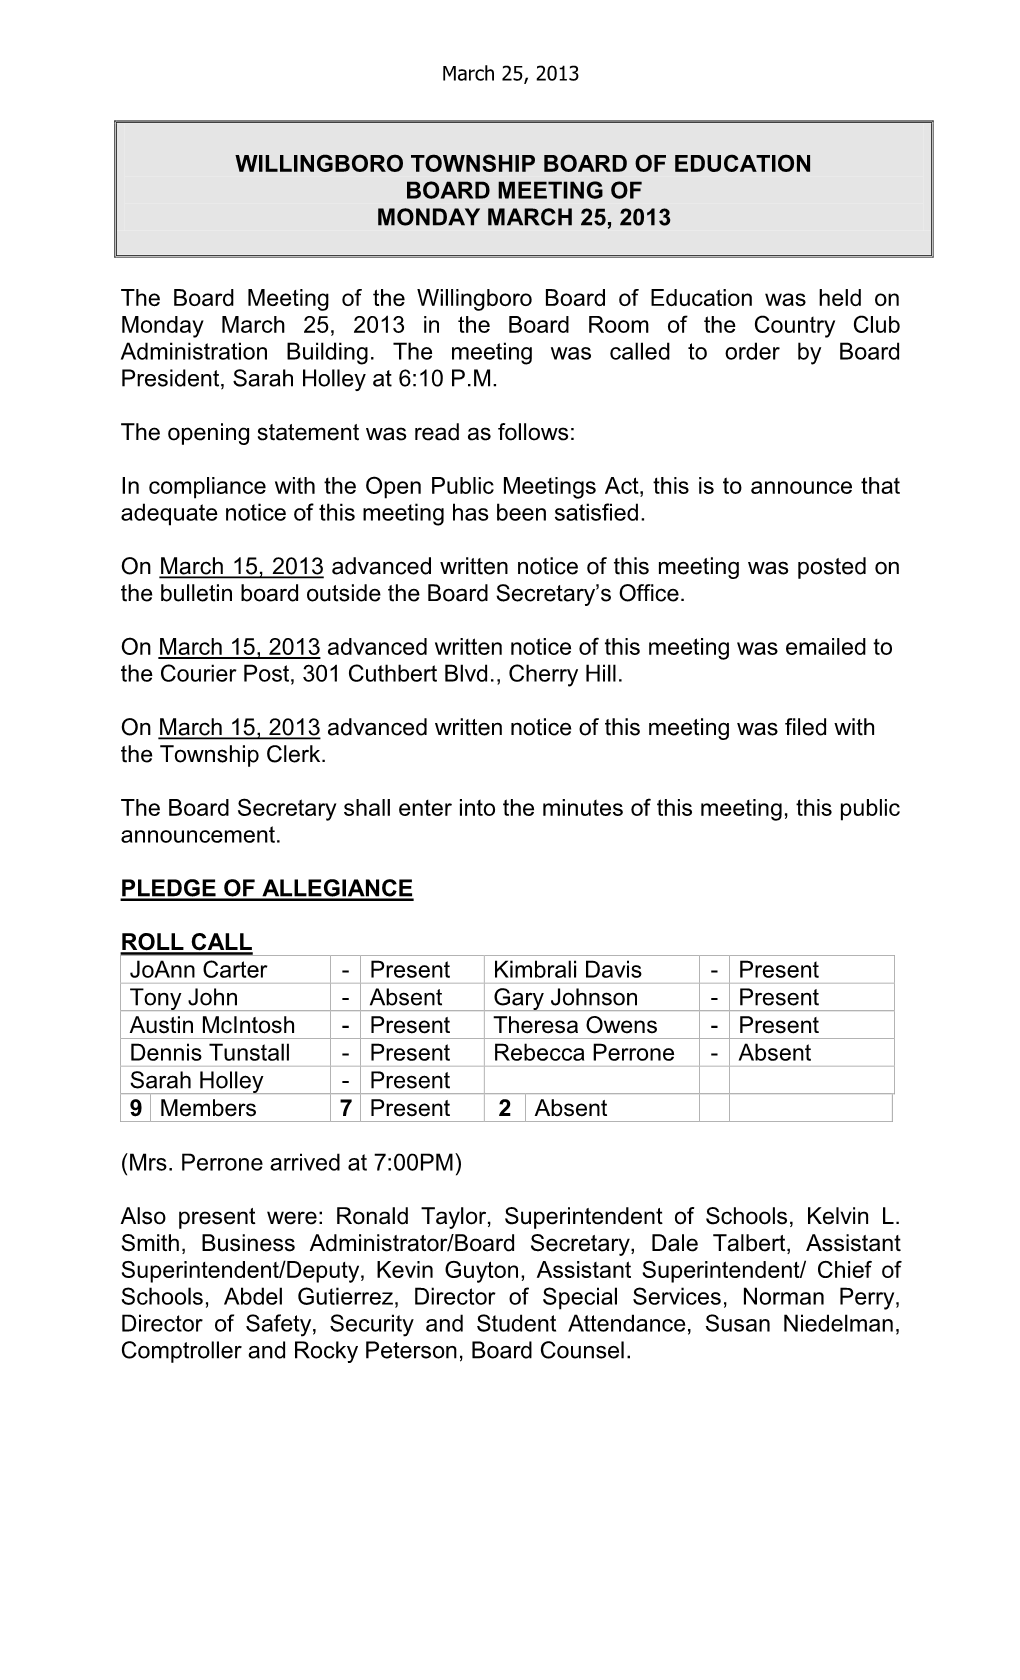 Willingboro Township Board of Education Board Meeting of Monday March 25, 2013